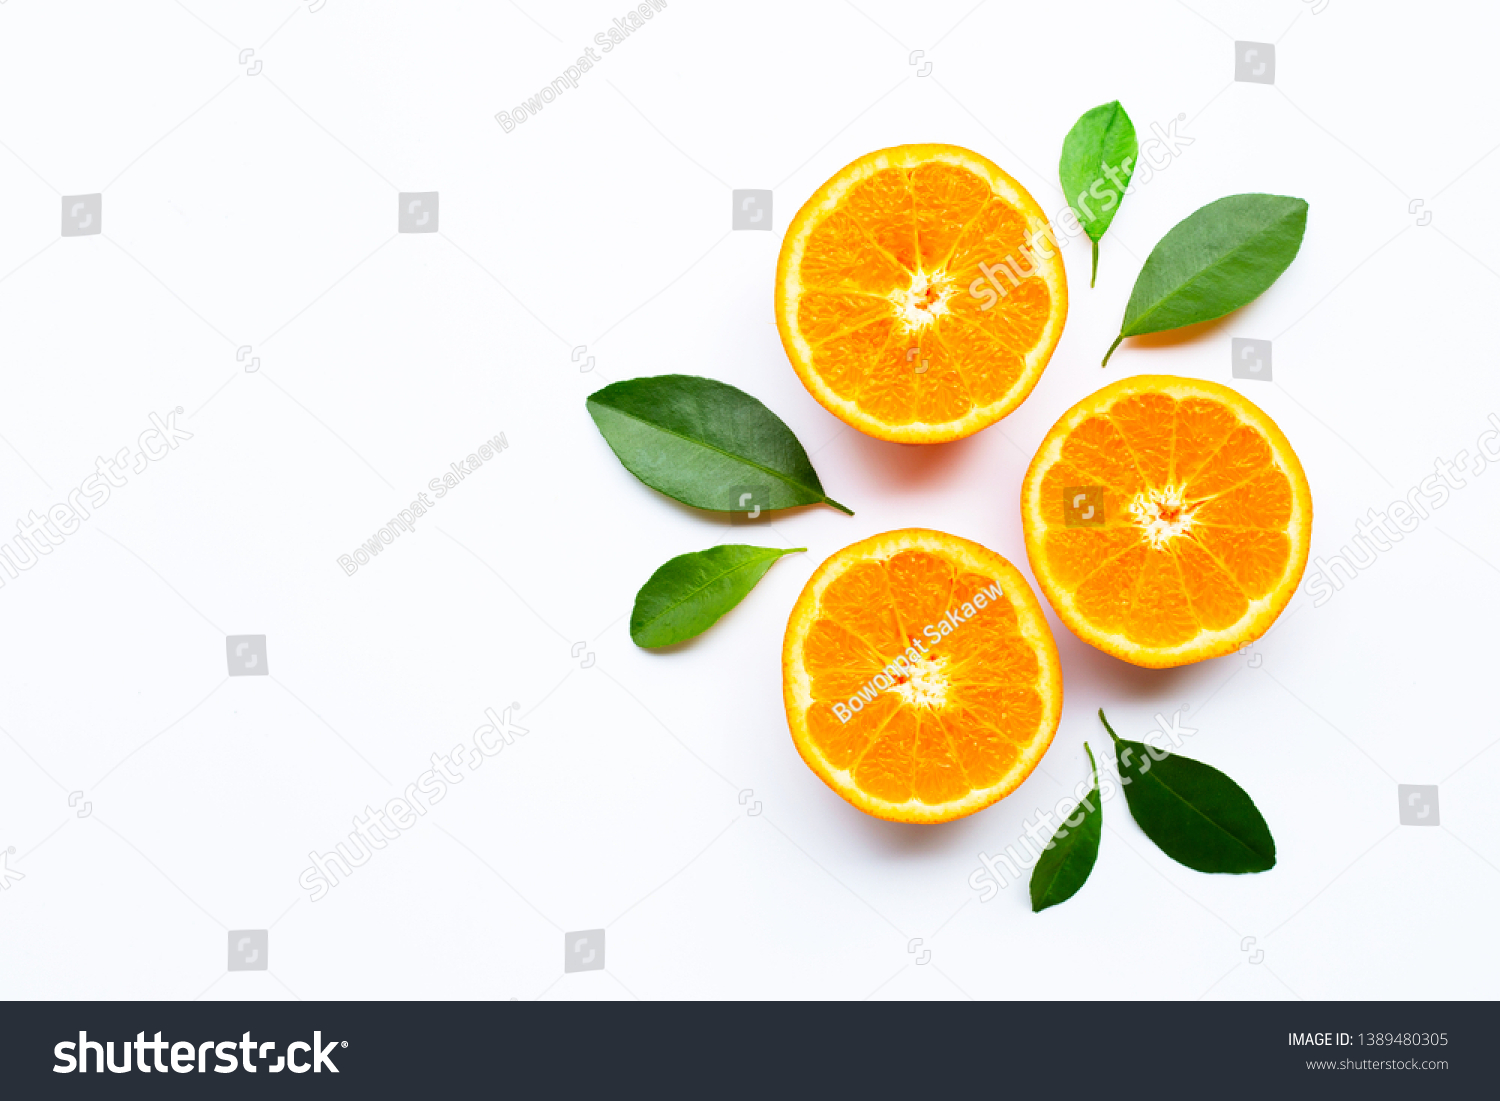 Oranges on white background. Copy space #1389480305